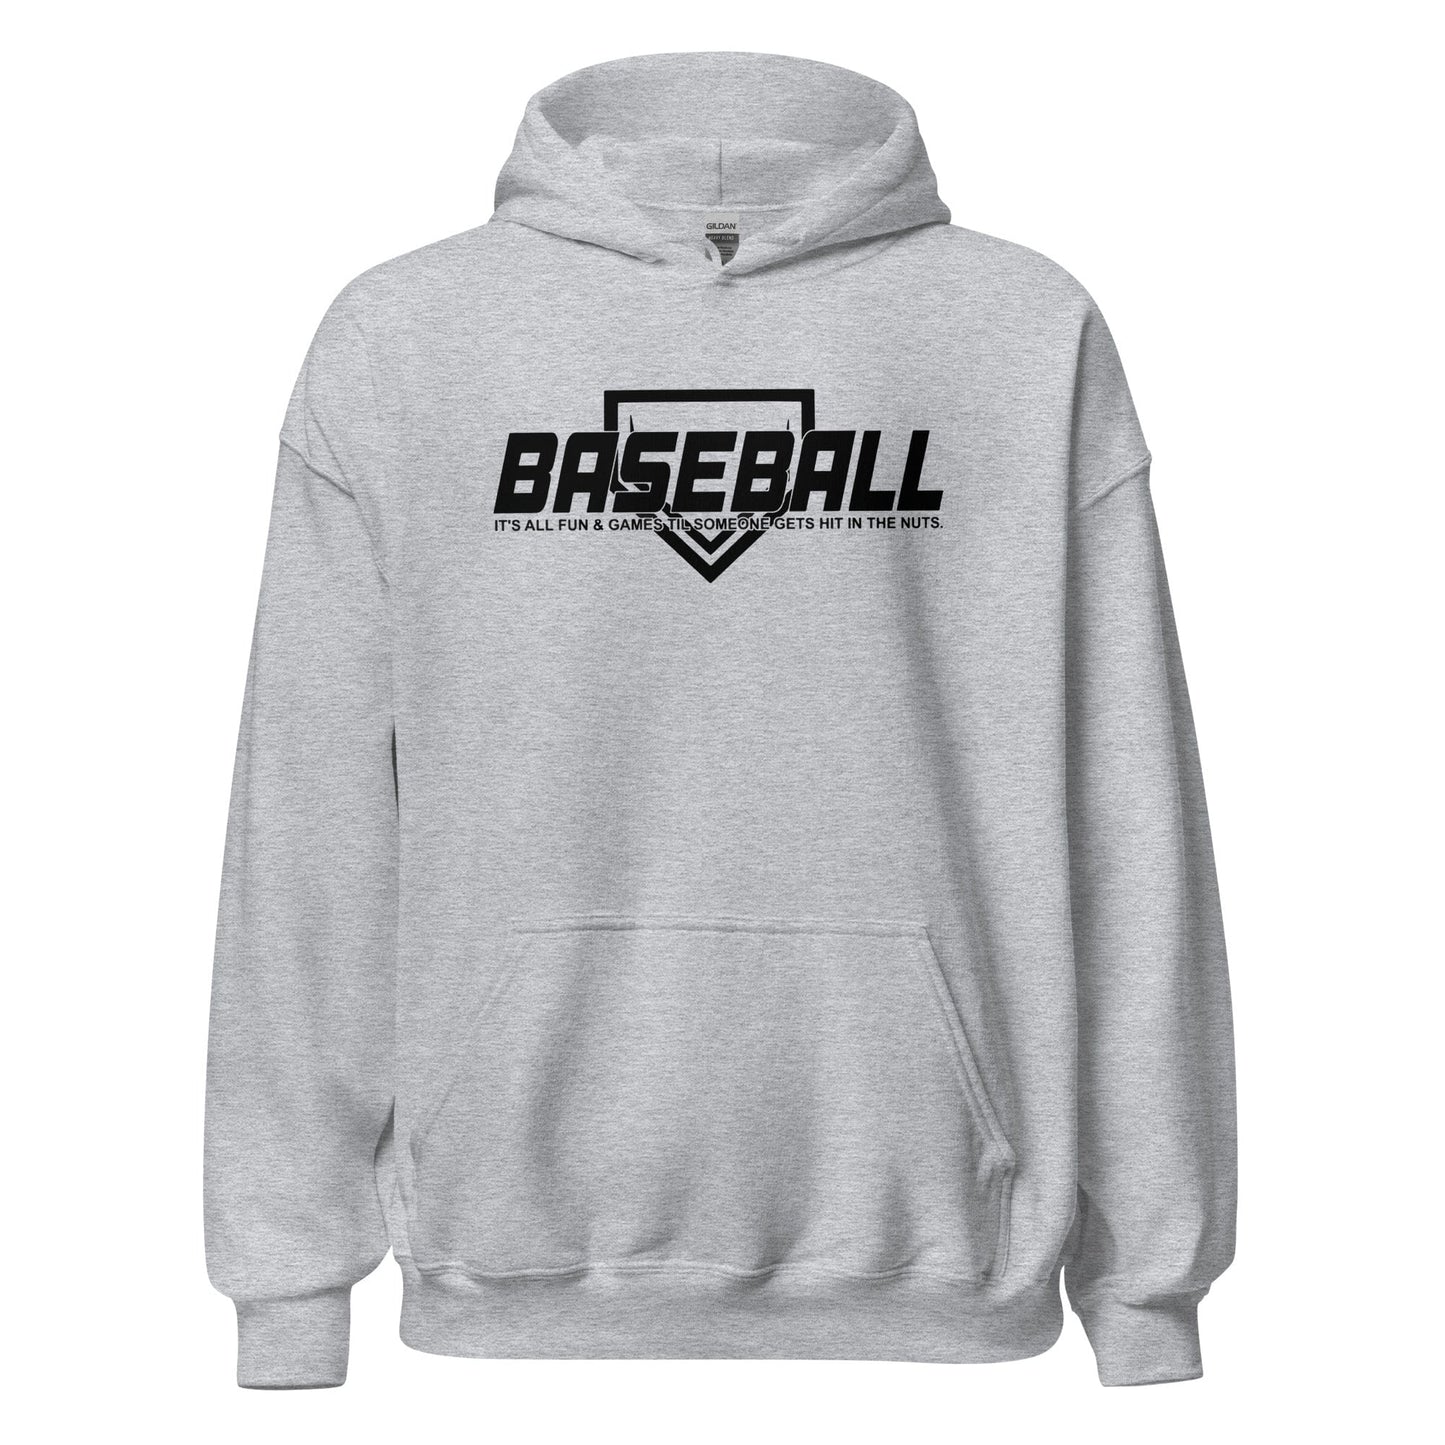 Baseball Its All Fun and Games - Adult Hoodie